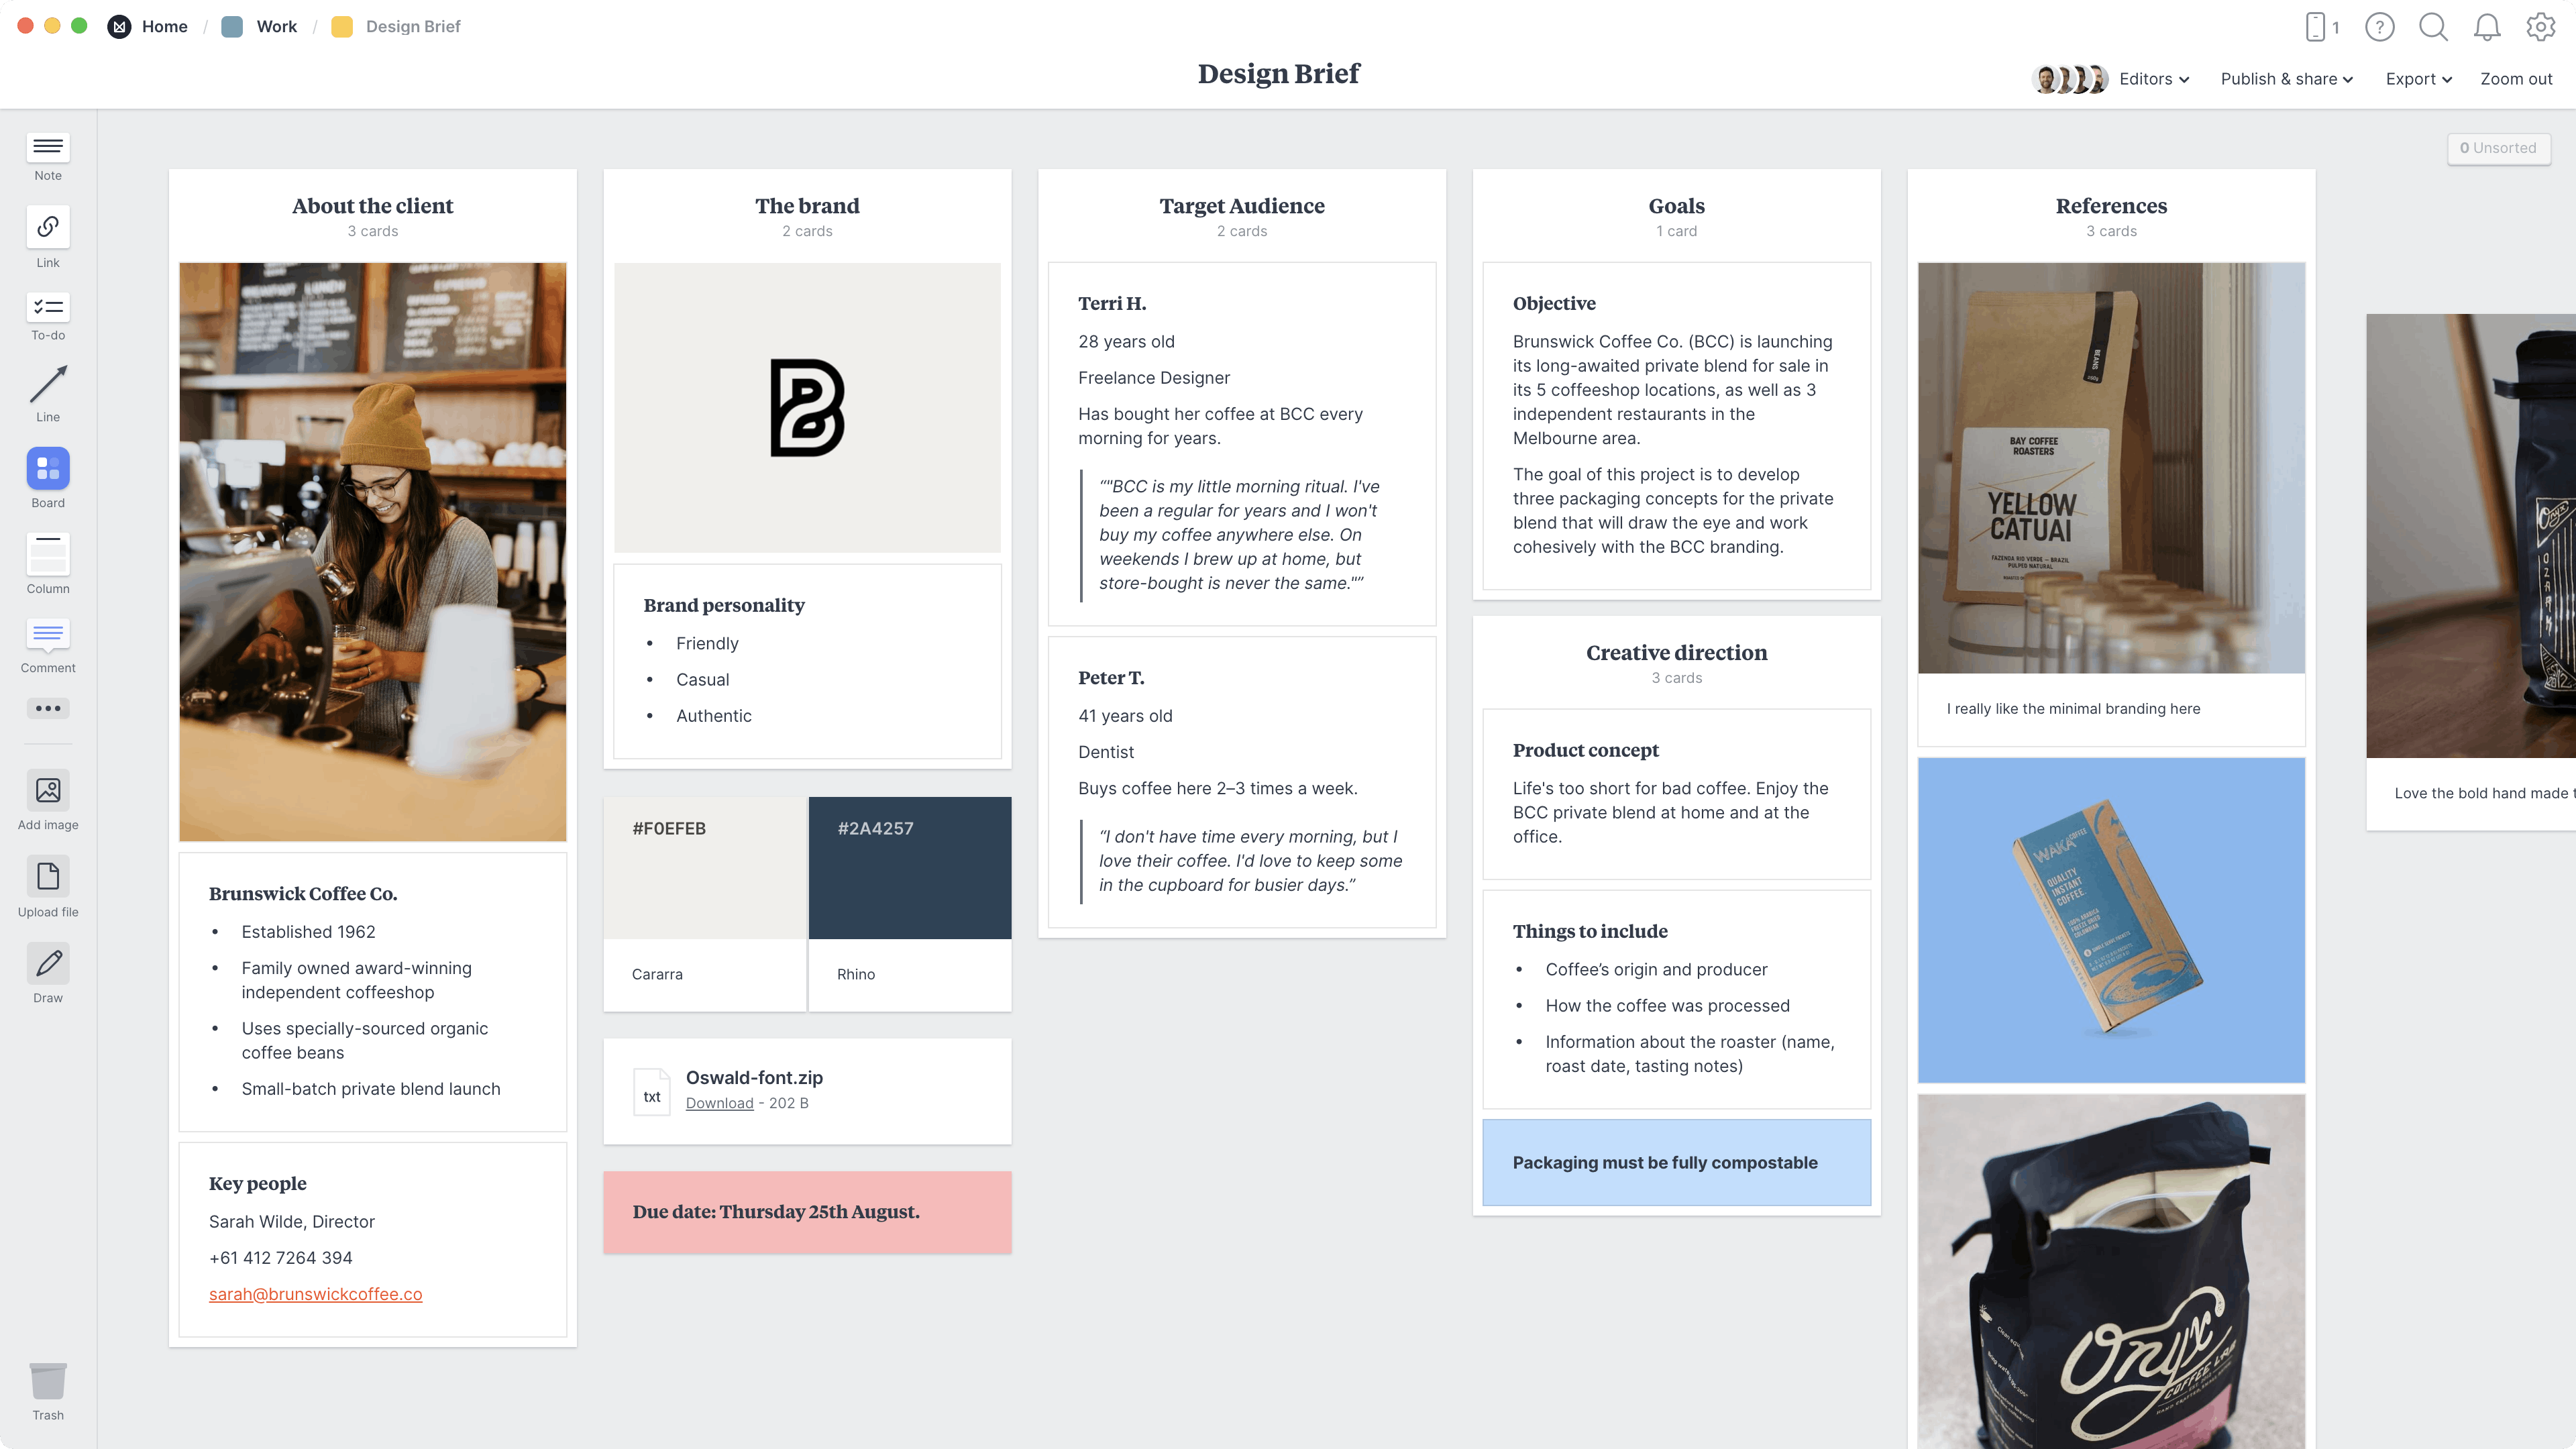 Brand Strategy Brief Template & Example - Milanote